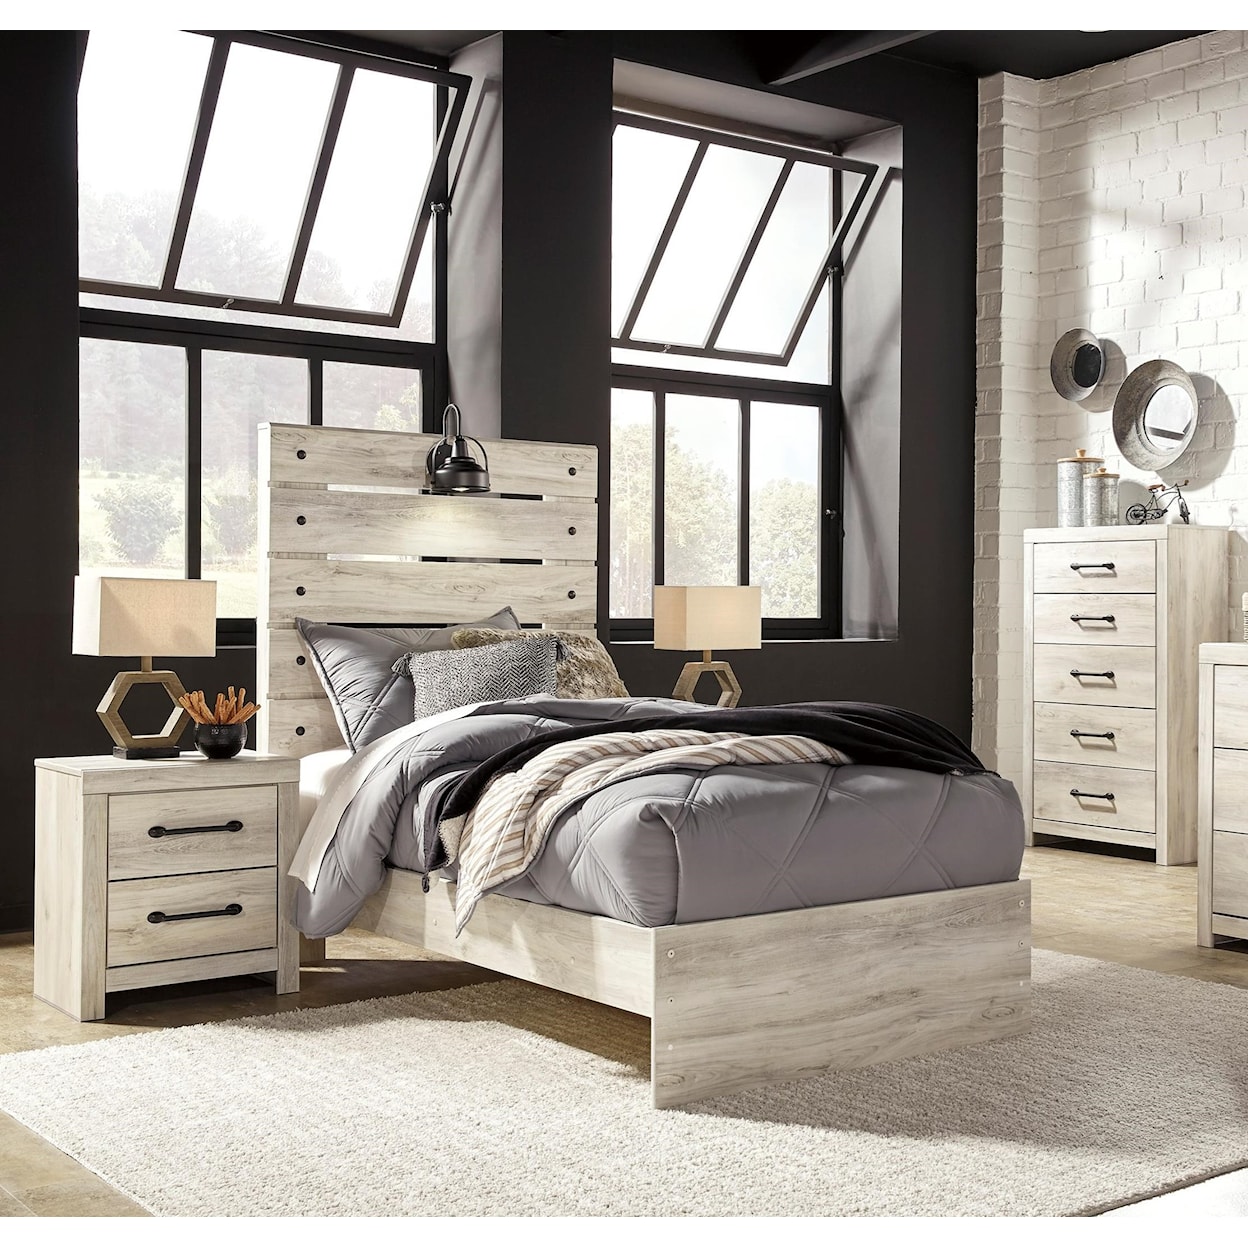 Benchcraft Cambeck Twin Bedroom Group